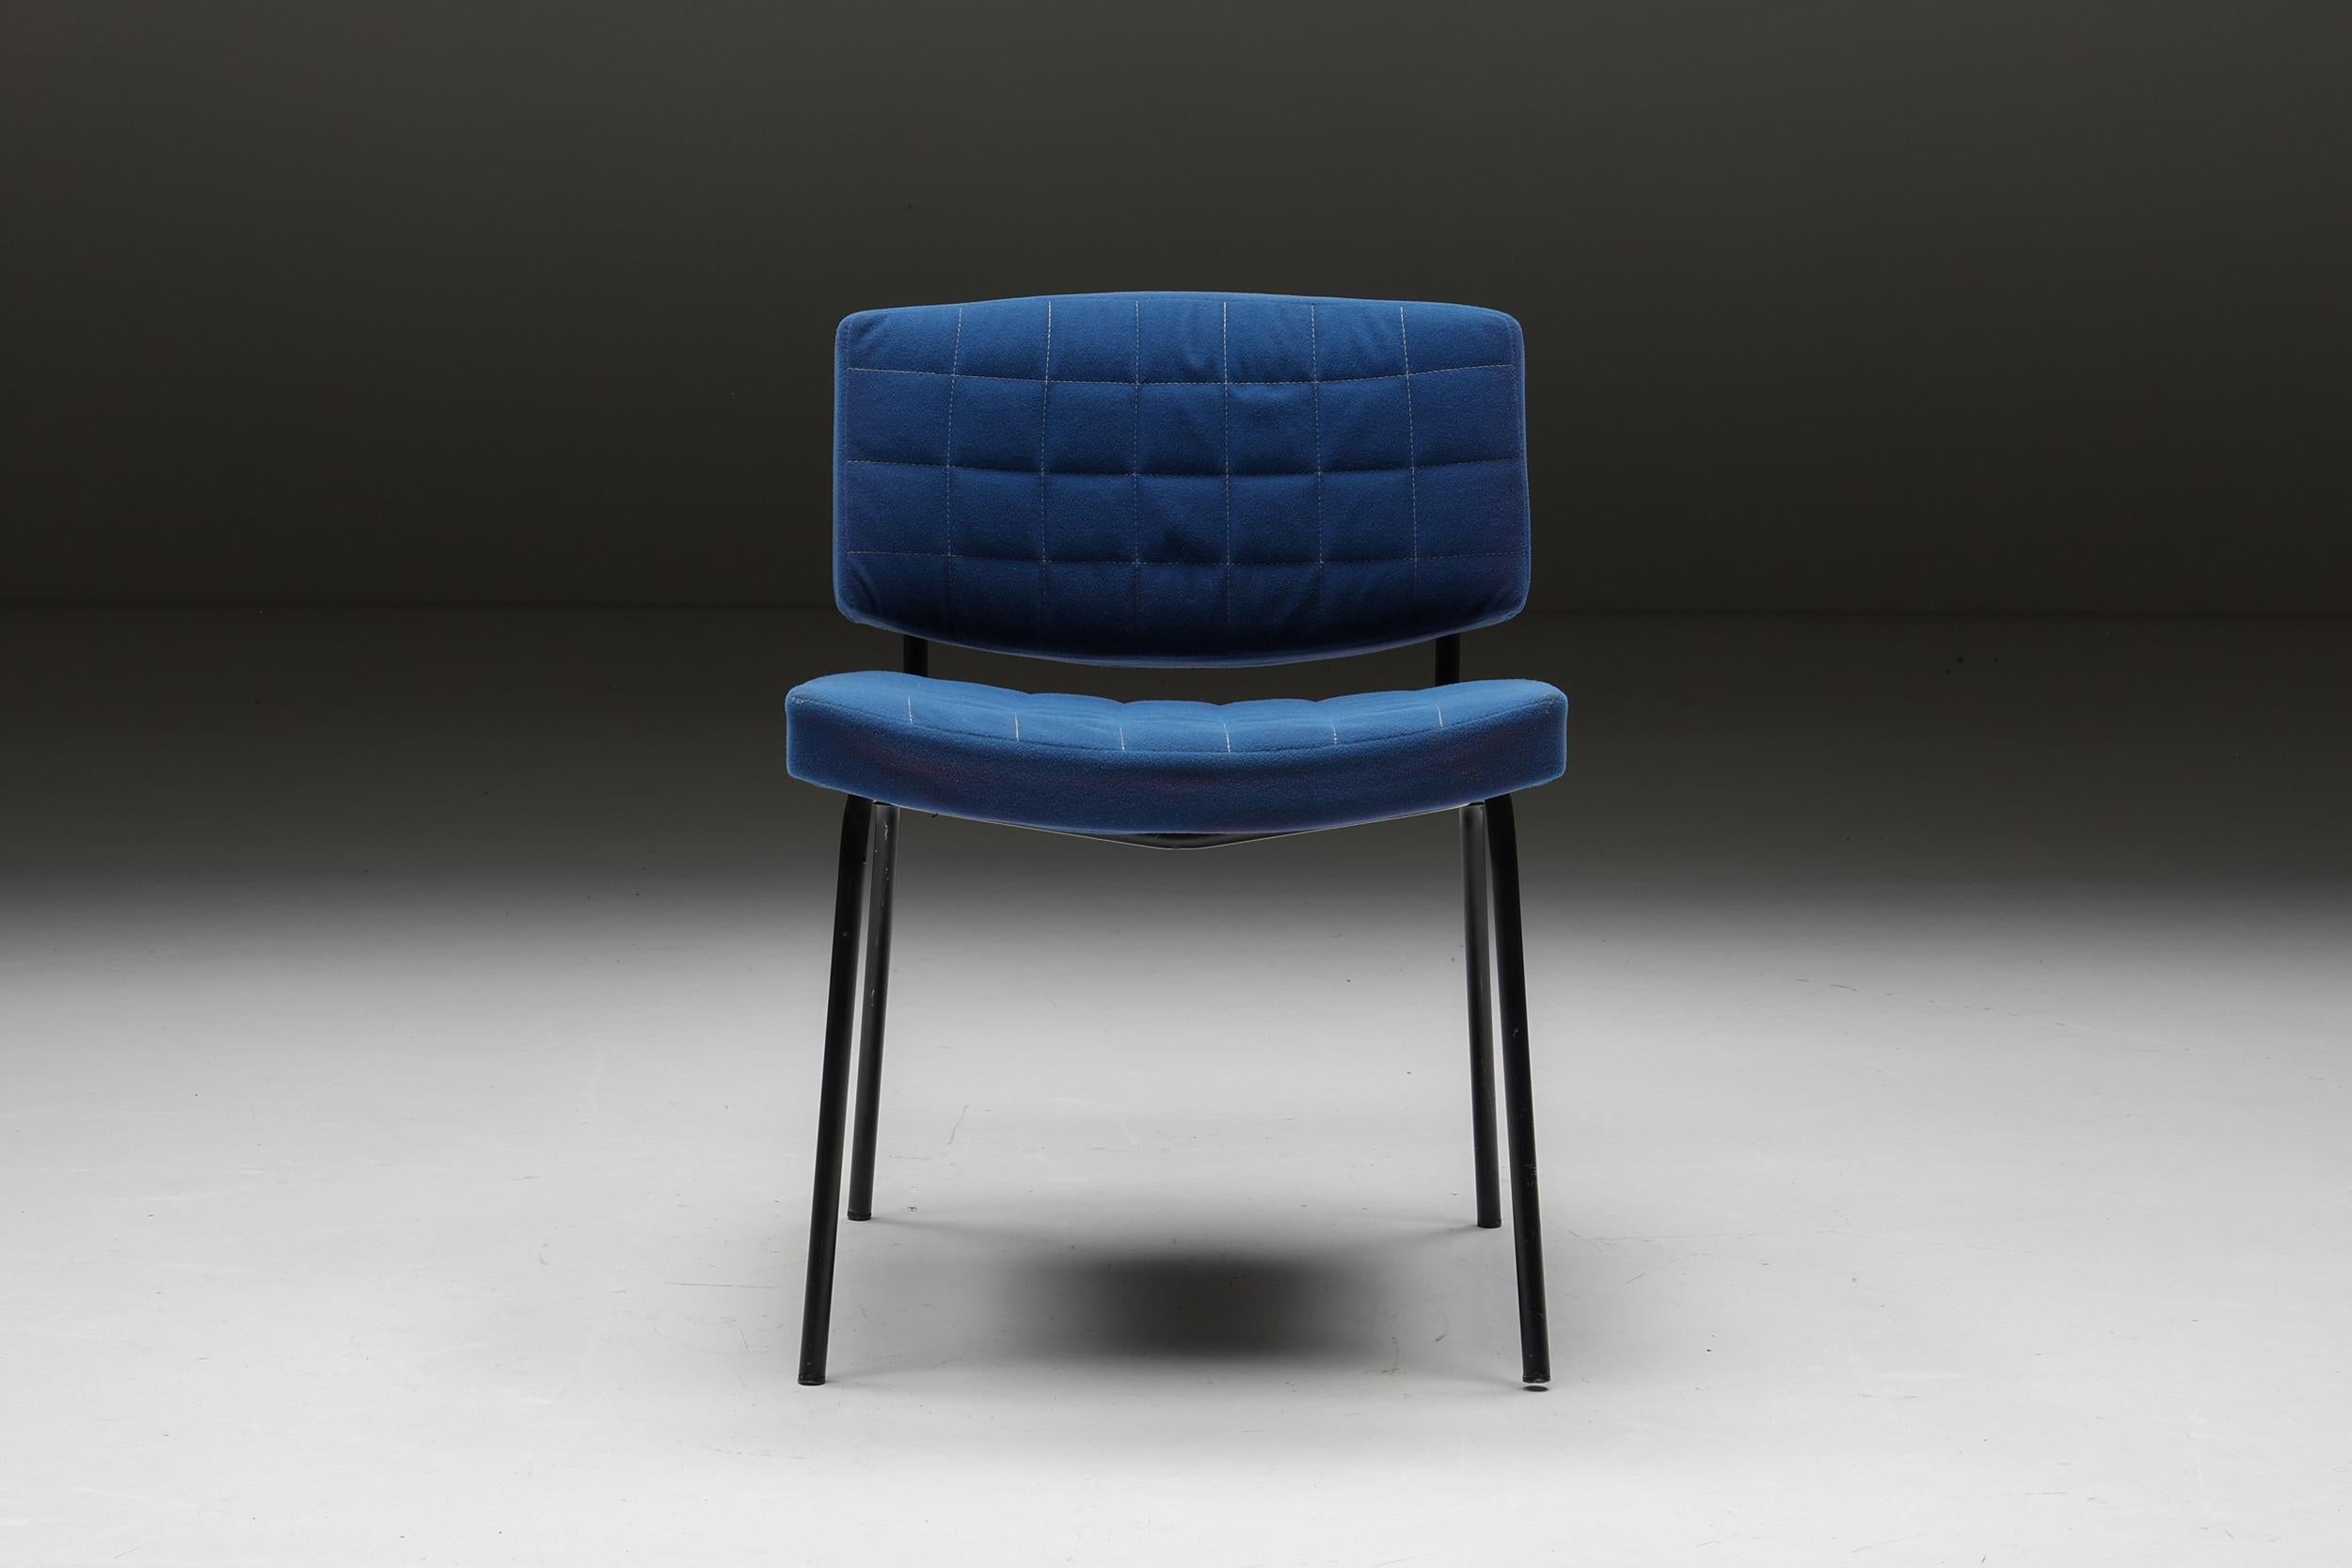 European Chairs in Blue Fabric & Metal Frame, 1980s